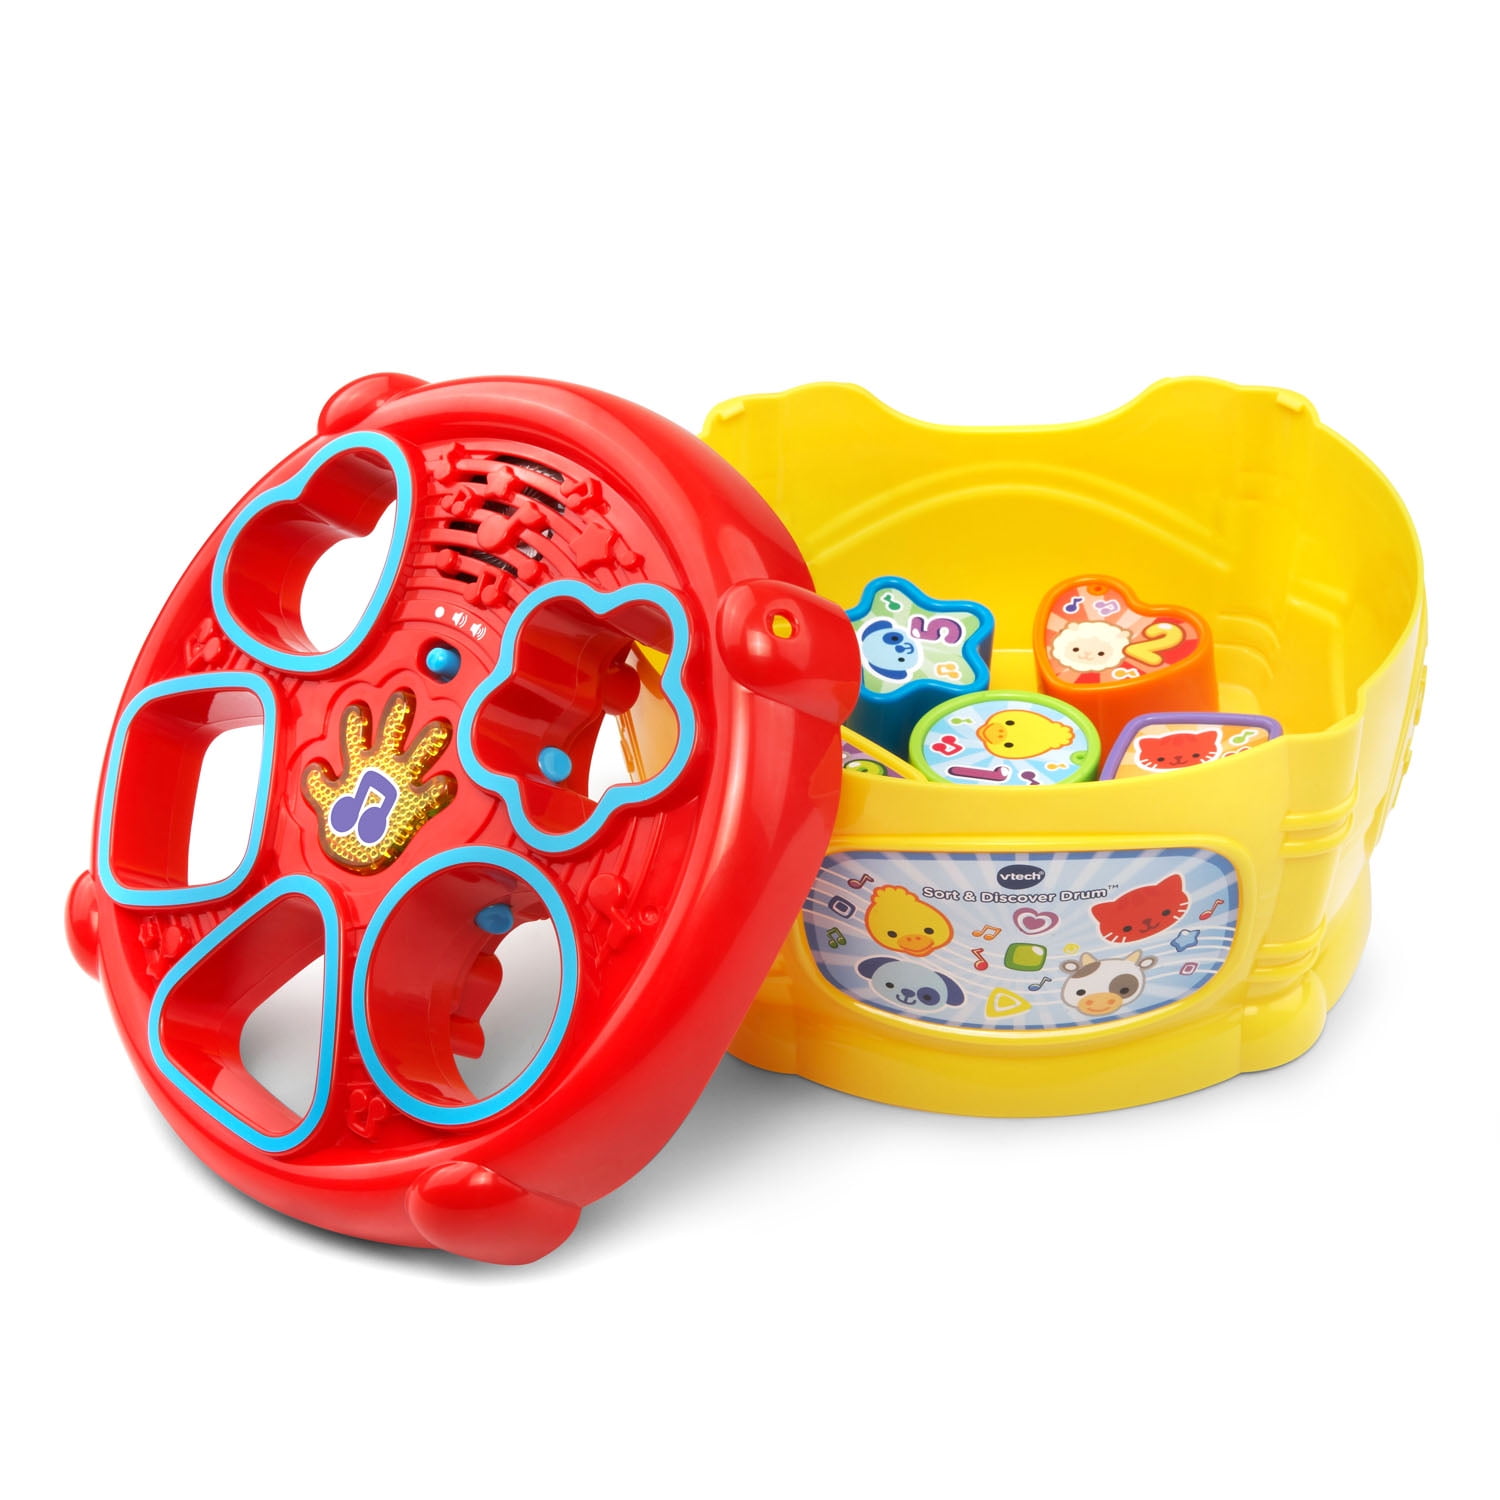 Vtech SORT & DISCOVER DRUM Educational Preschool Young Child Toy BN 